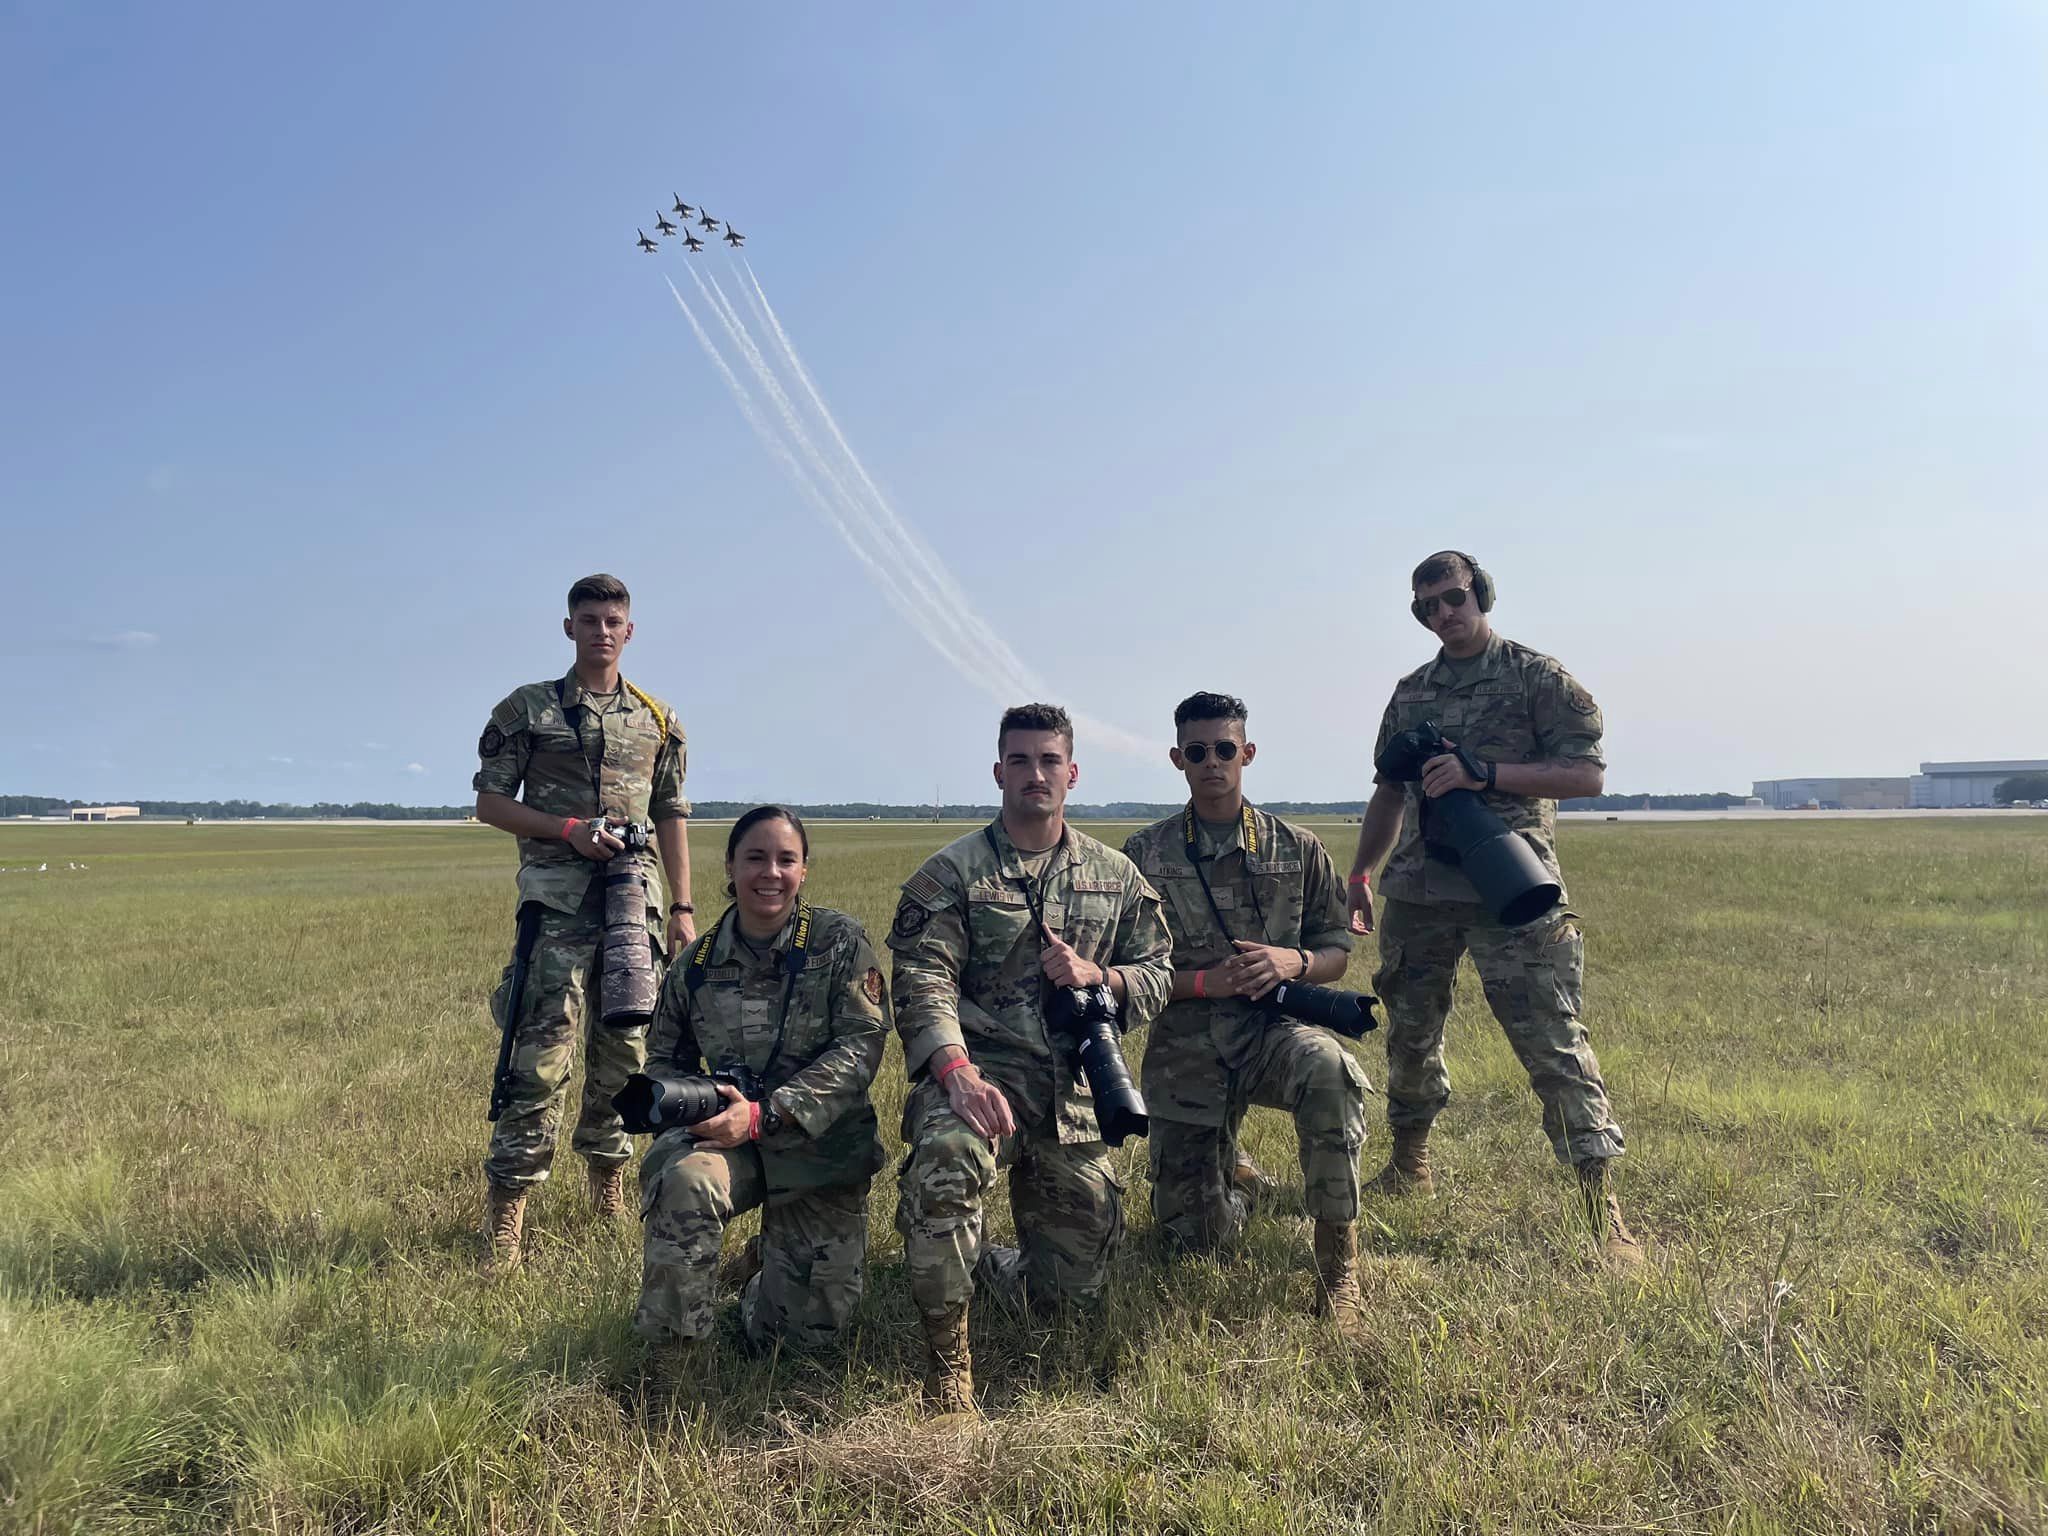 A group of Airmen pose for a photo at Keesler Air Force Base.